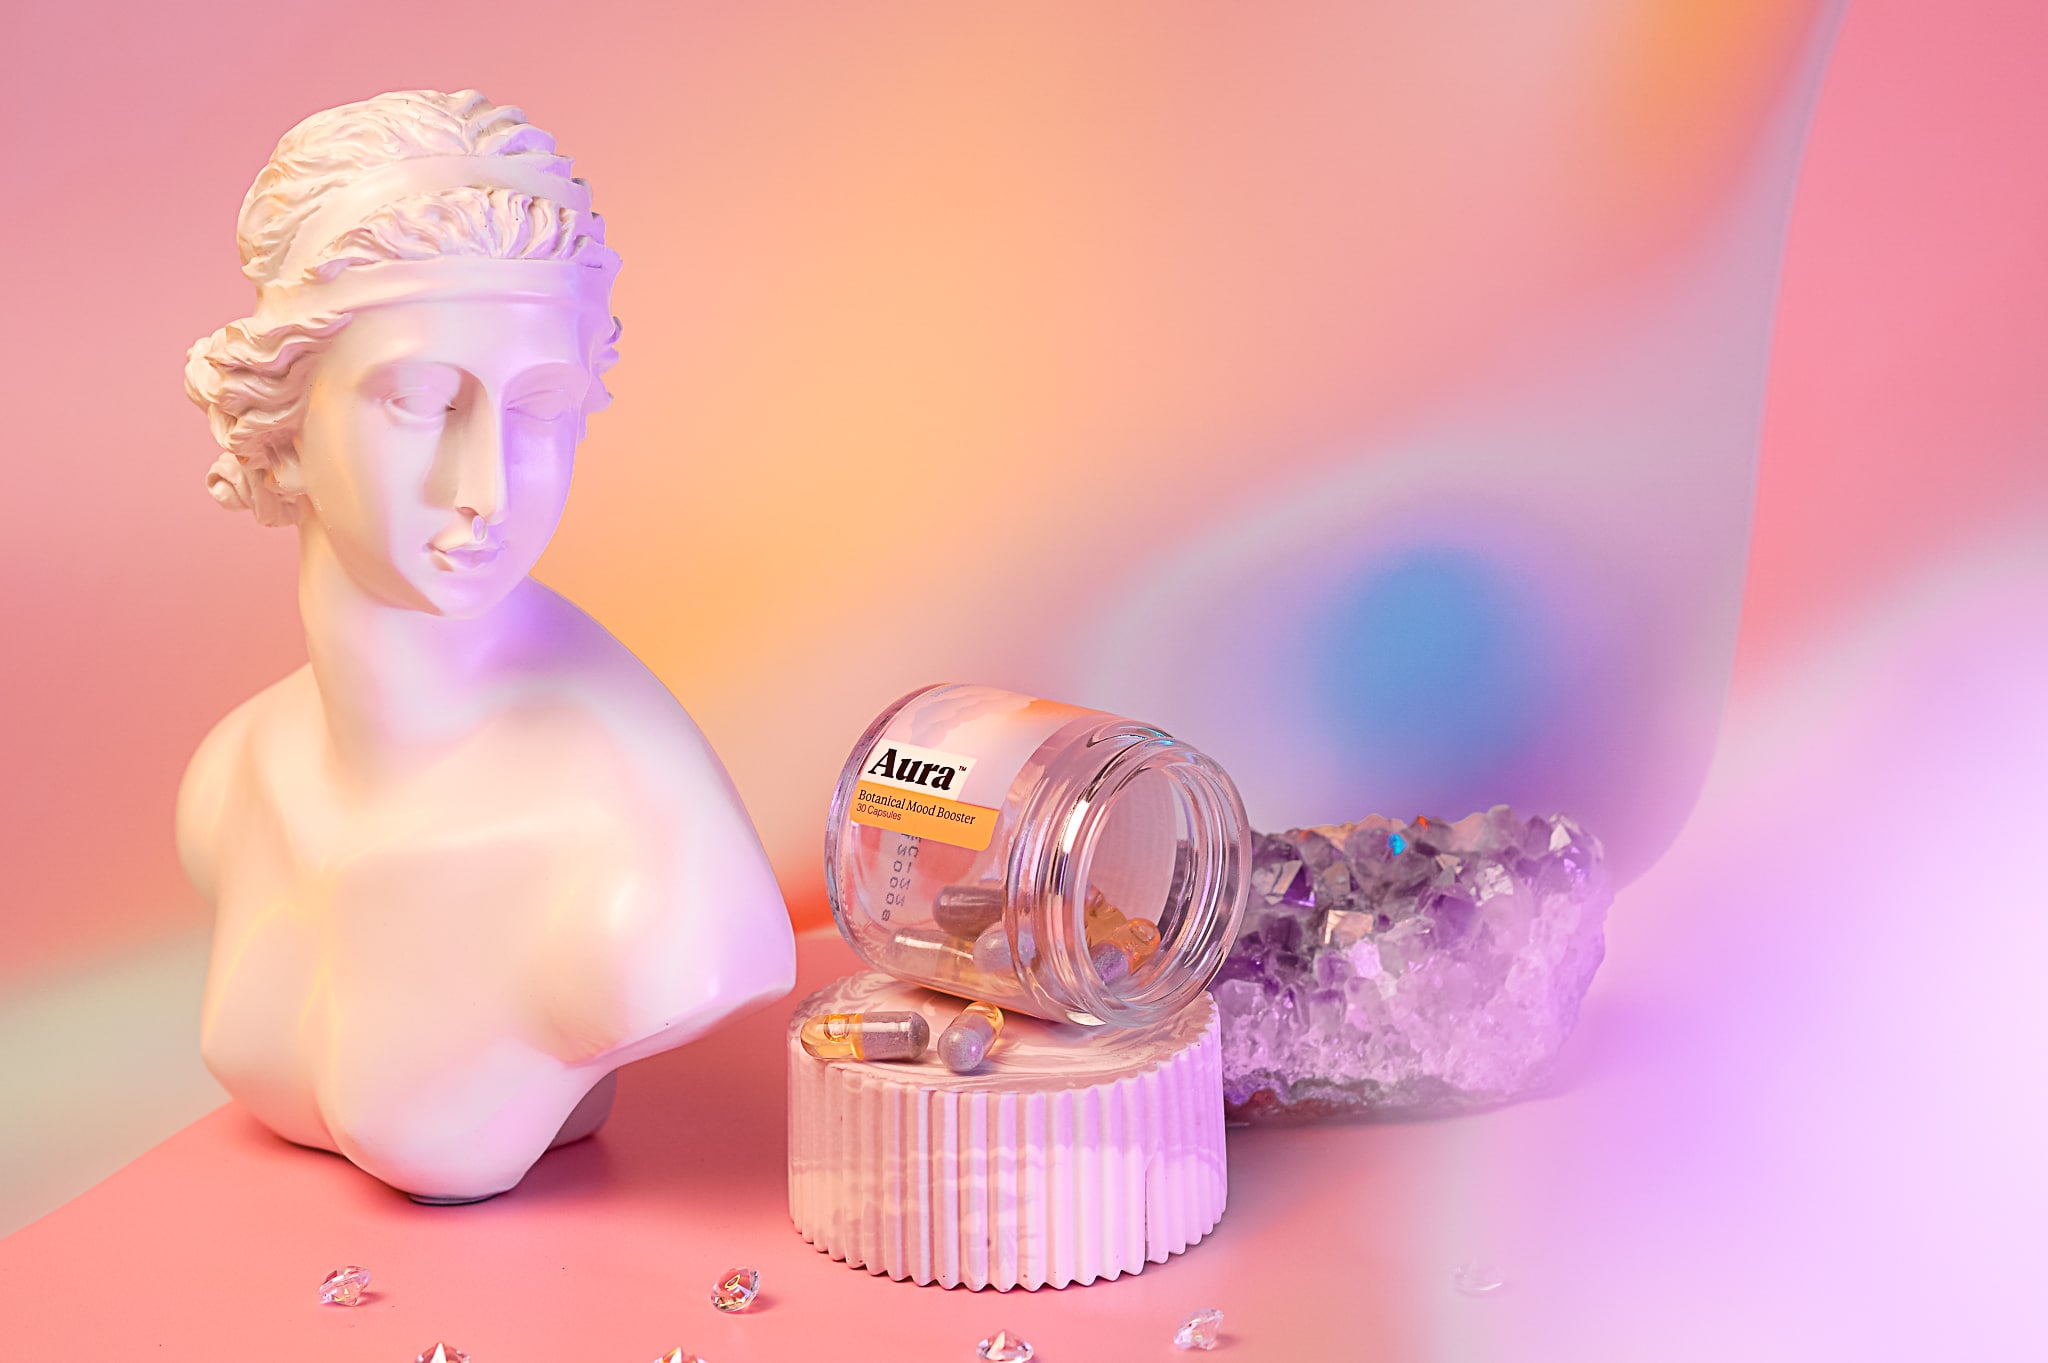 female statue bust with unico product on pedestal with rainbow background